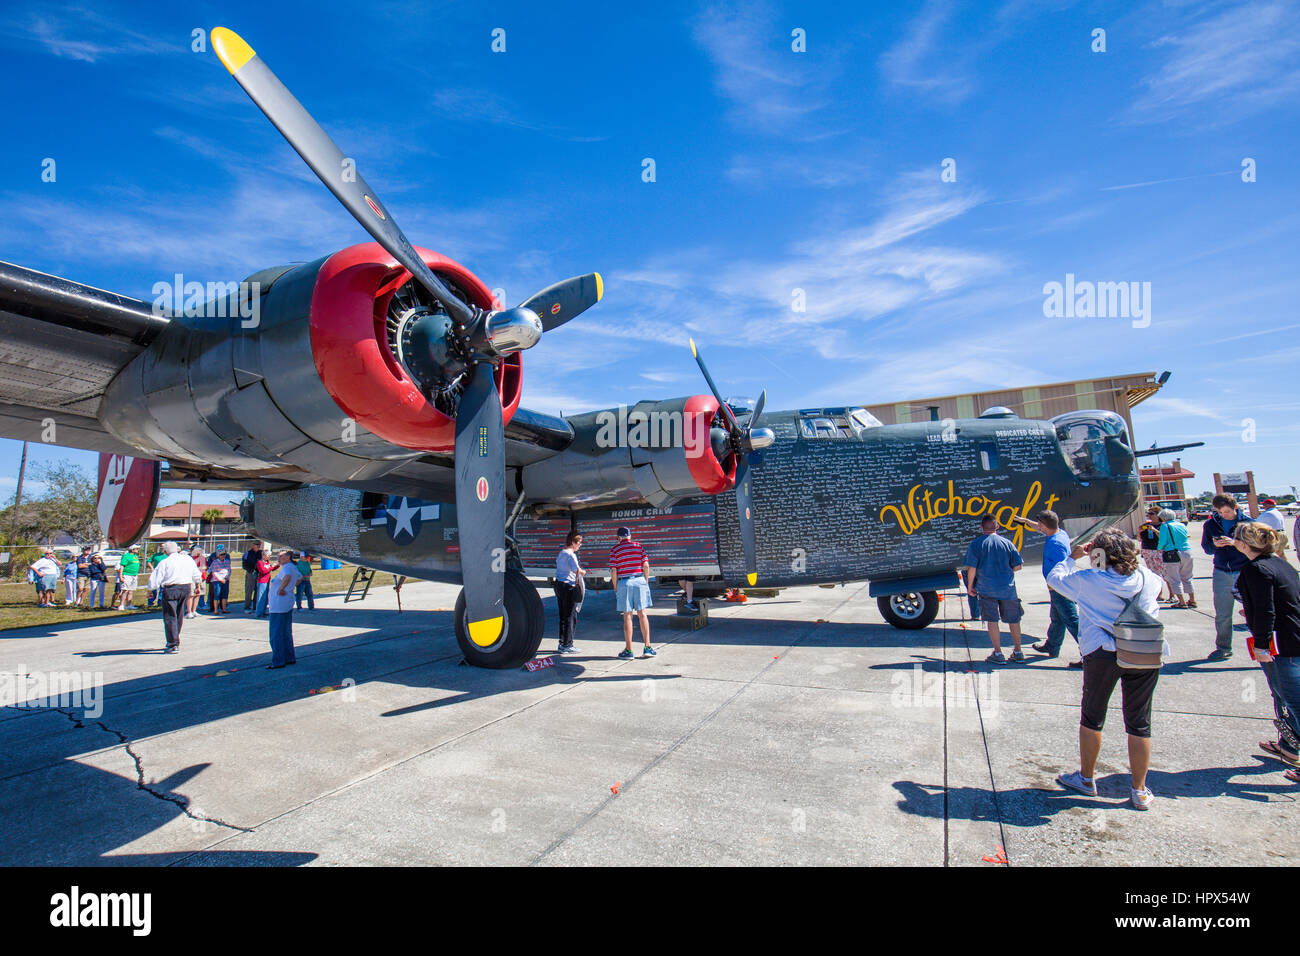 B-24 Liberator bomber at Wings of FreedomTour of historic vintage WWII war planes at Venice Airport in Venice Florida Stock Photo